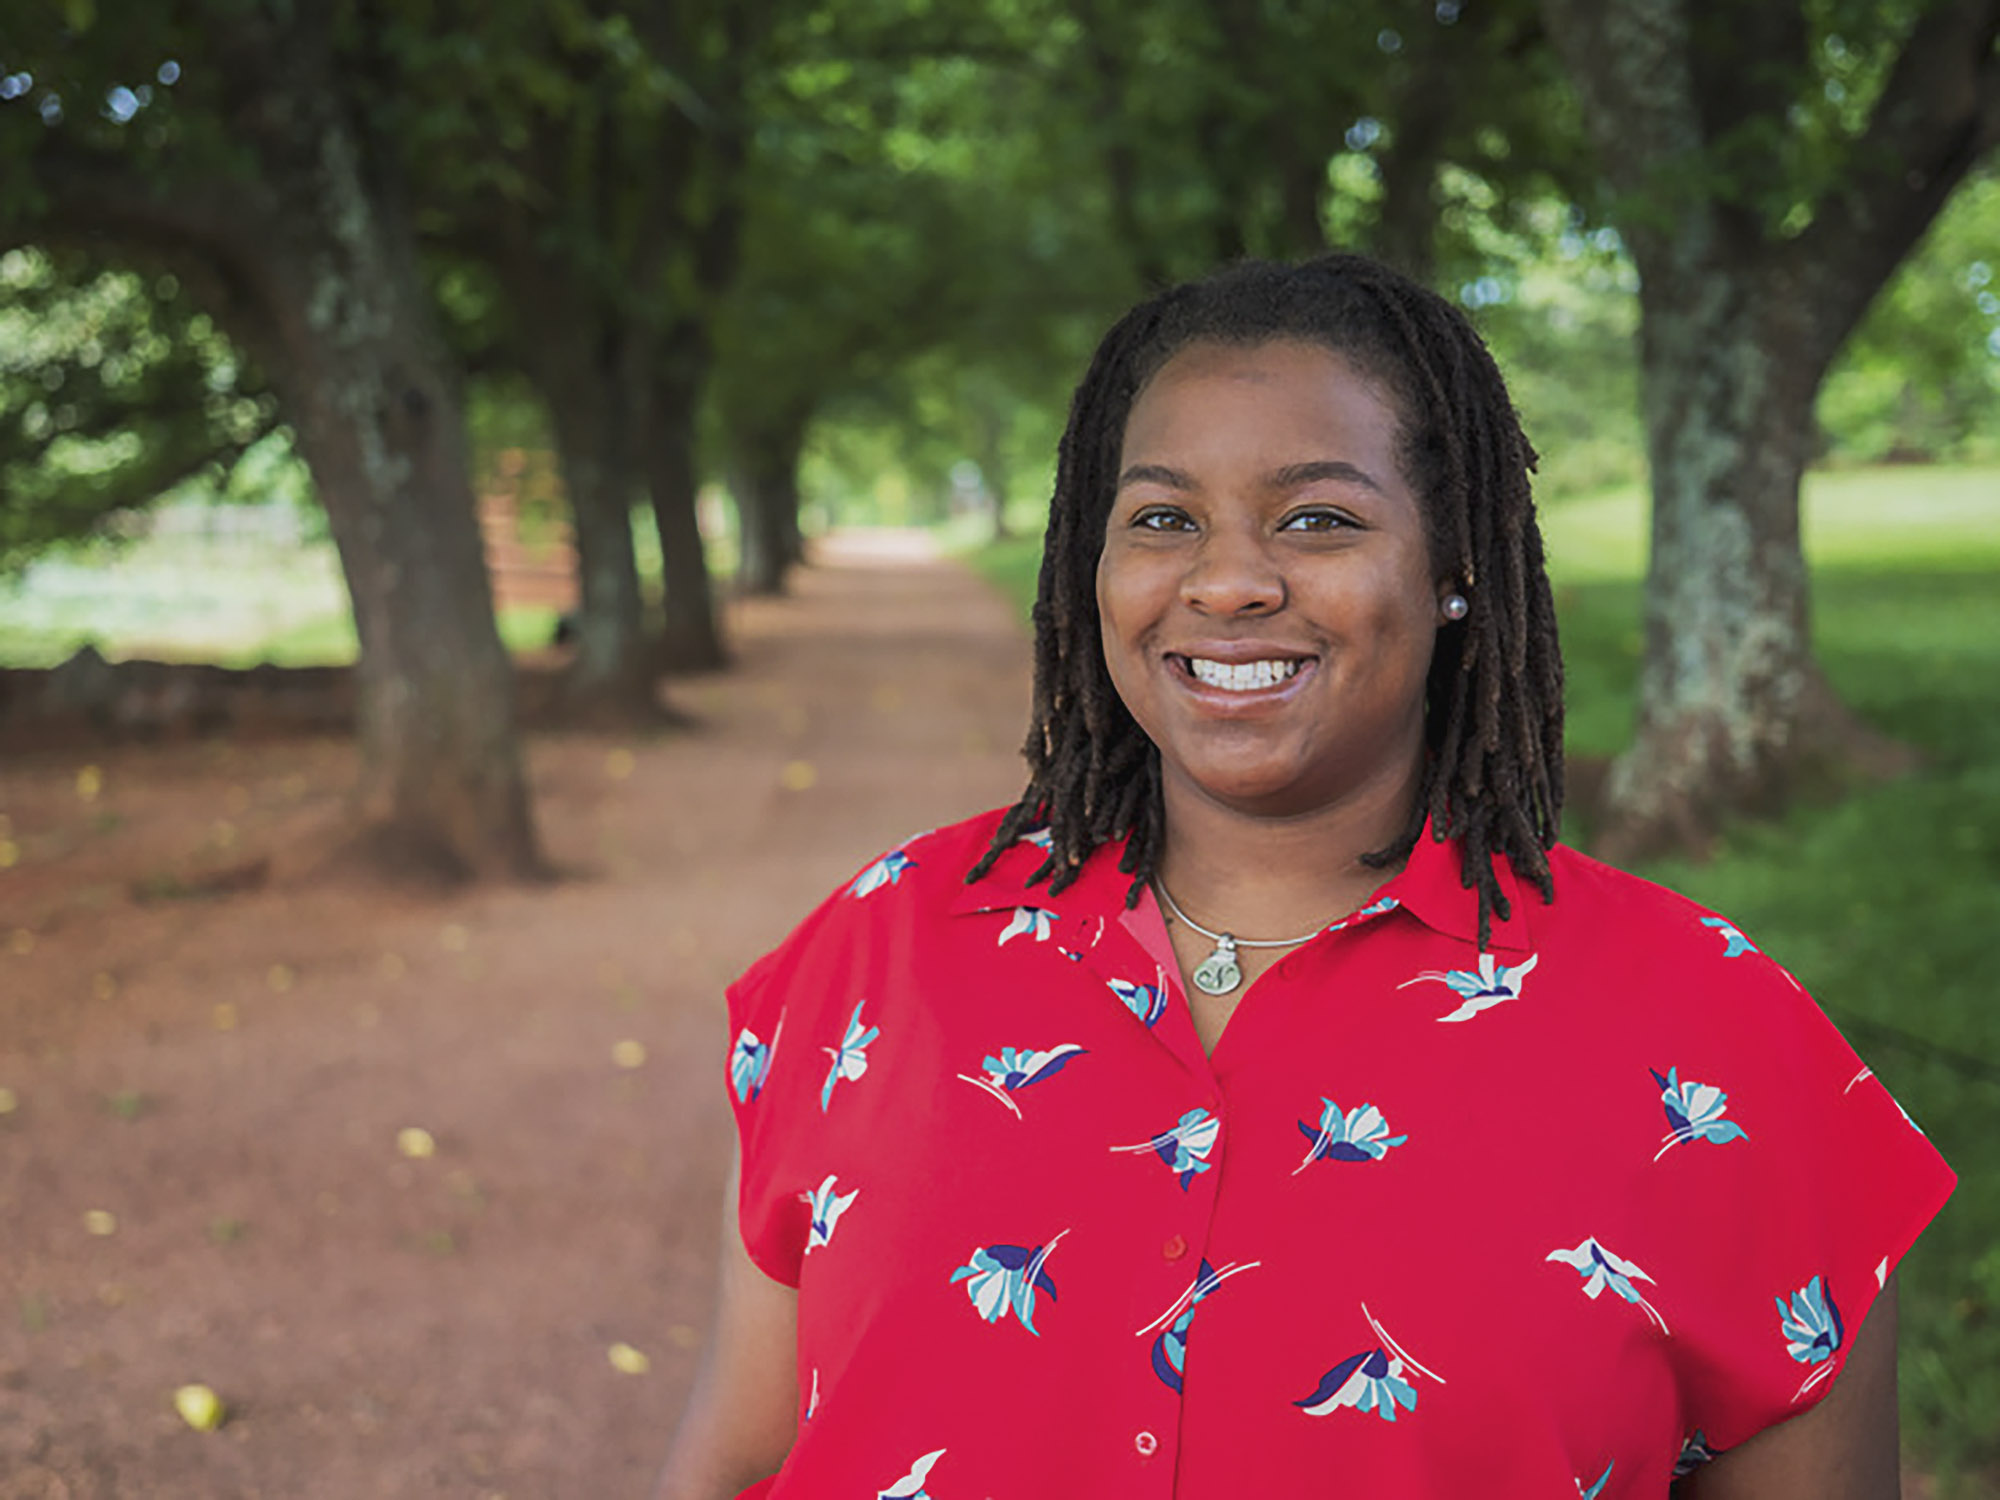 After getting her master’s in architectural history at UVA, Niya Bates worked at Monticello full-time until last year and is now pursuing a Ph.D. (Photo courtesy of Thomas Jefferson Foundation)